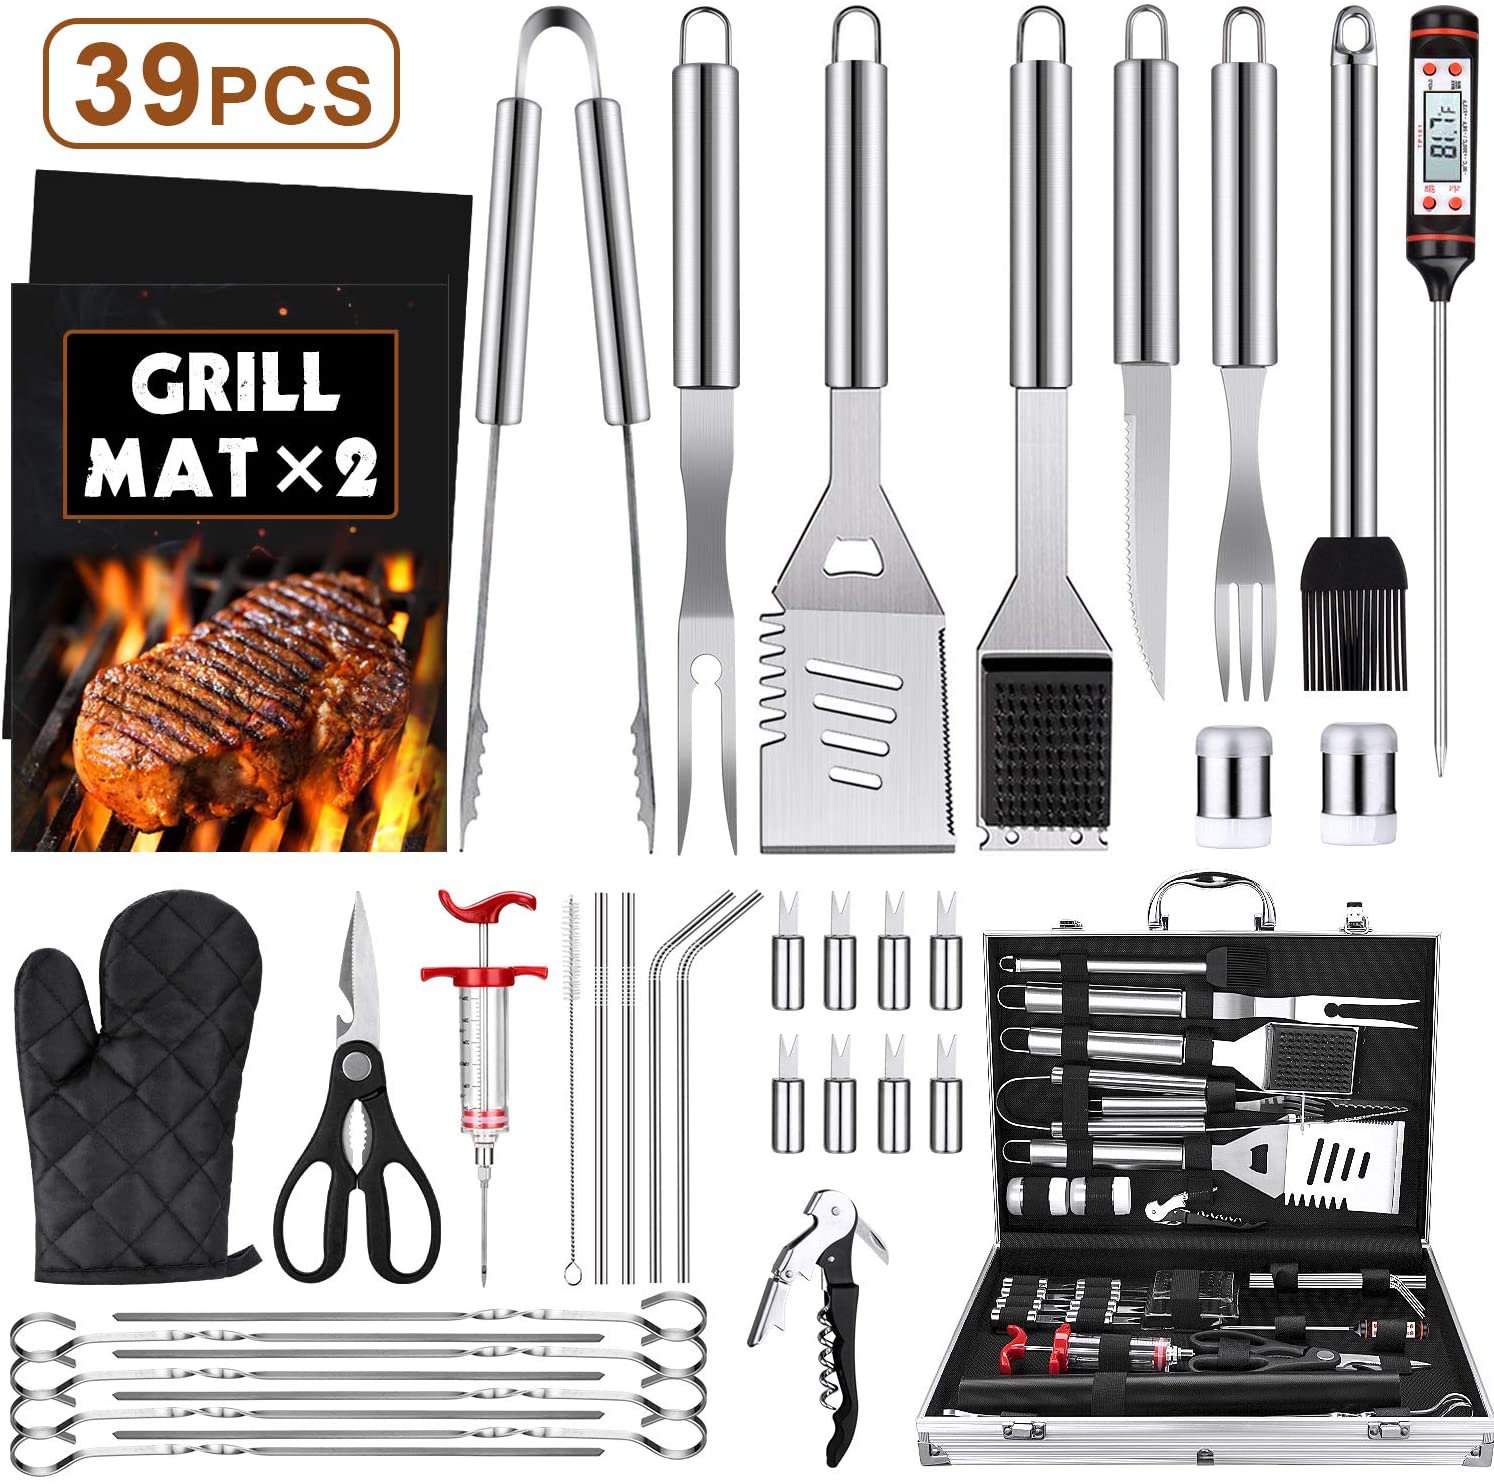 BBQ LOVER GIFT-- 39 PCS Stainless Steel Grilling Barbecue Tool Sets Kit ...